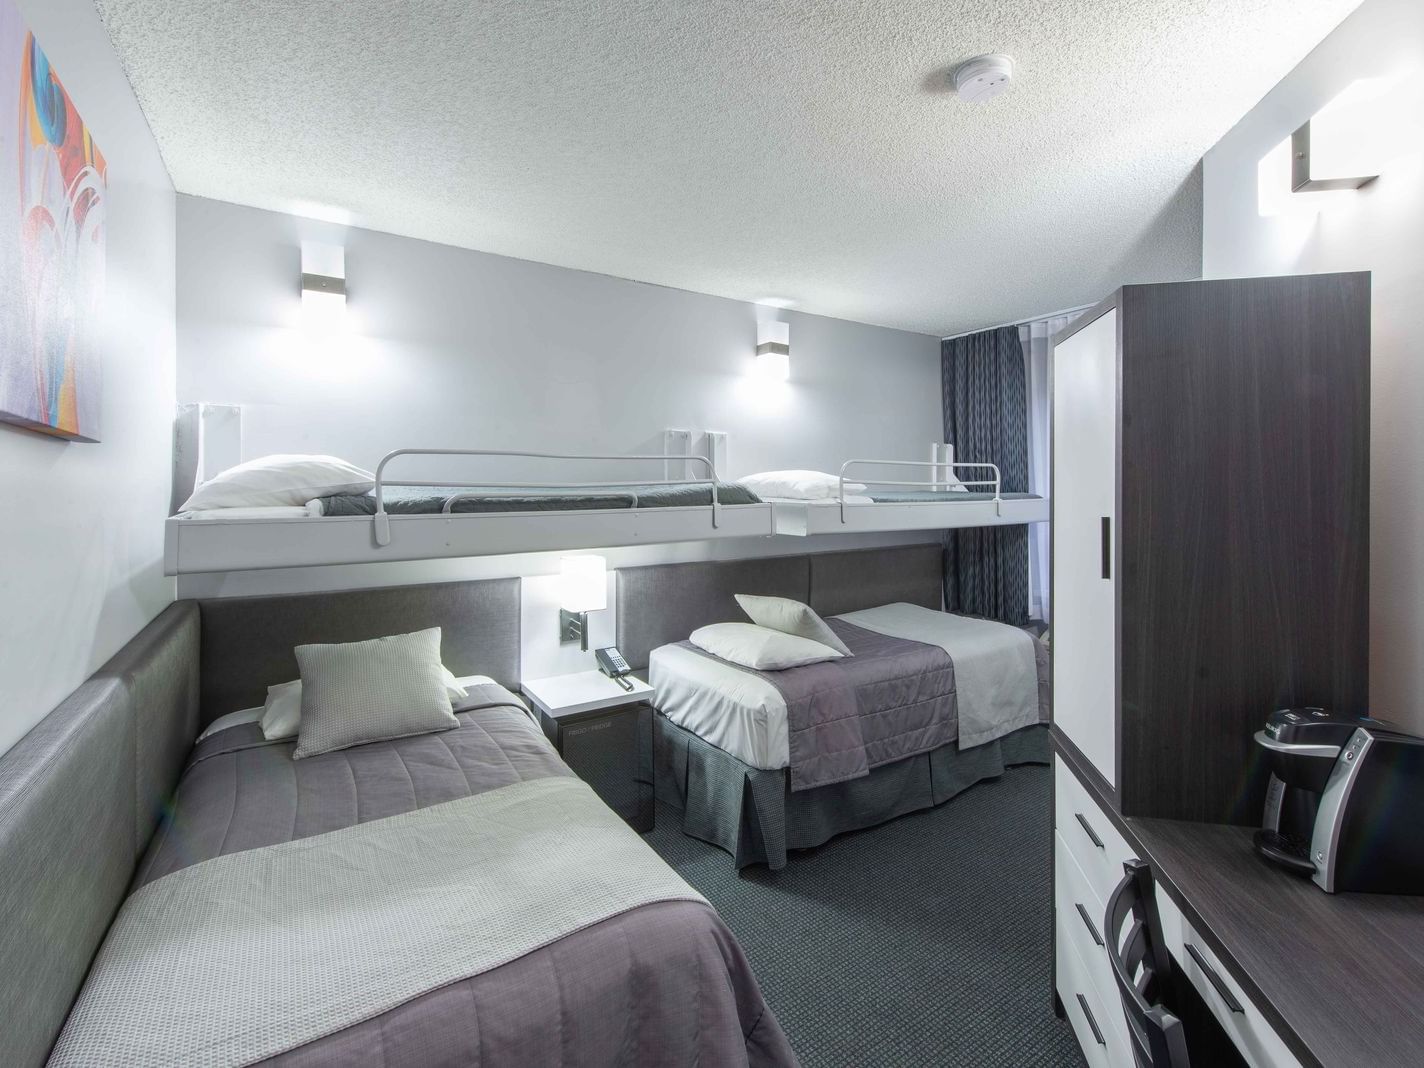 2 Single beds & 2 bunk beds in Quadruple Room at Travelodge Montreal Centre